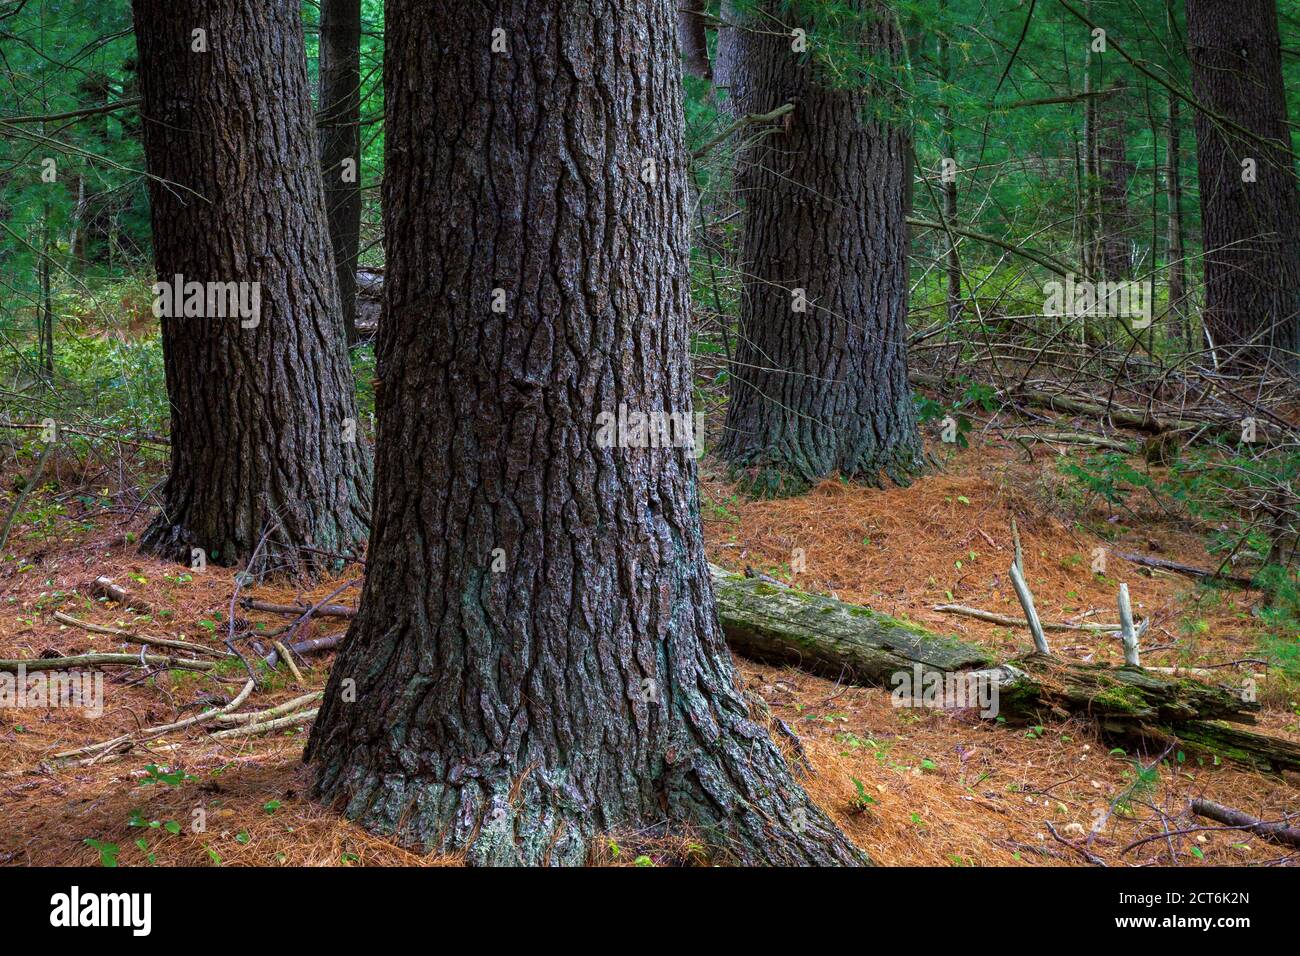 A mature Eastern While Pine forest in Pennsylvania’s Pocono Mountains Stock Photo